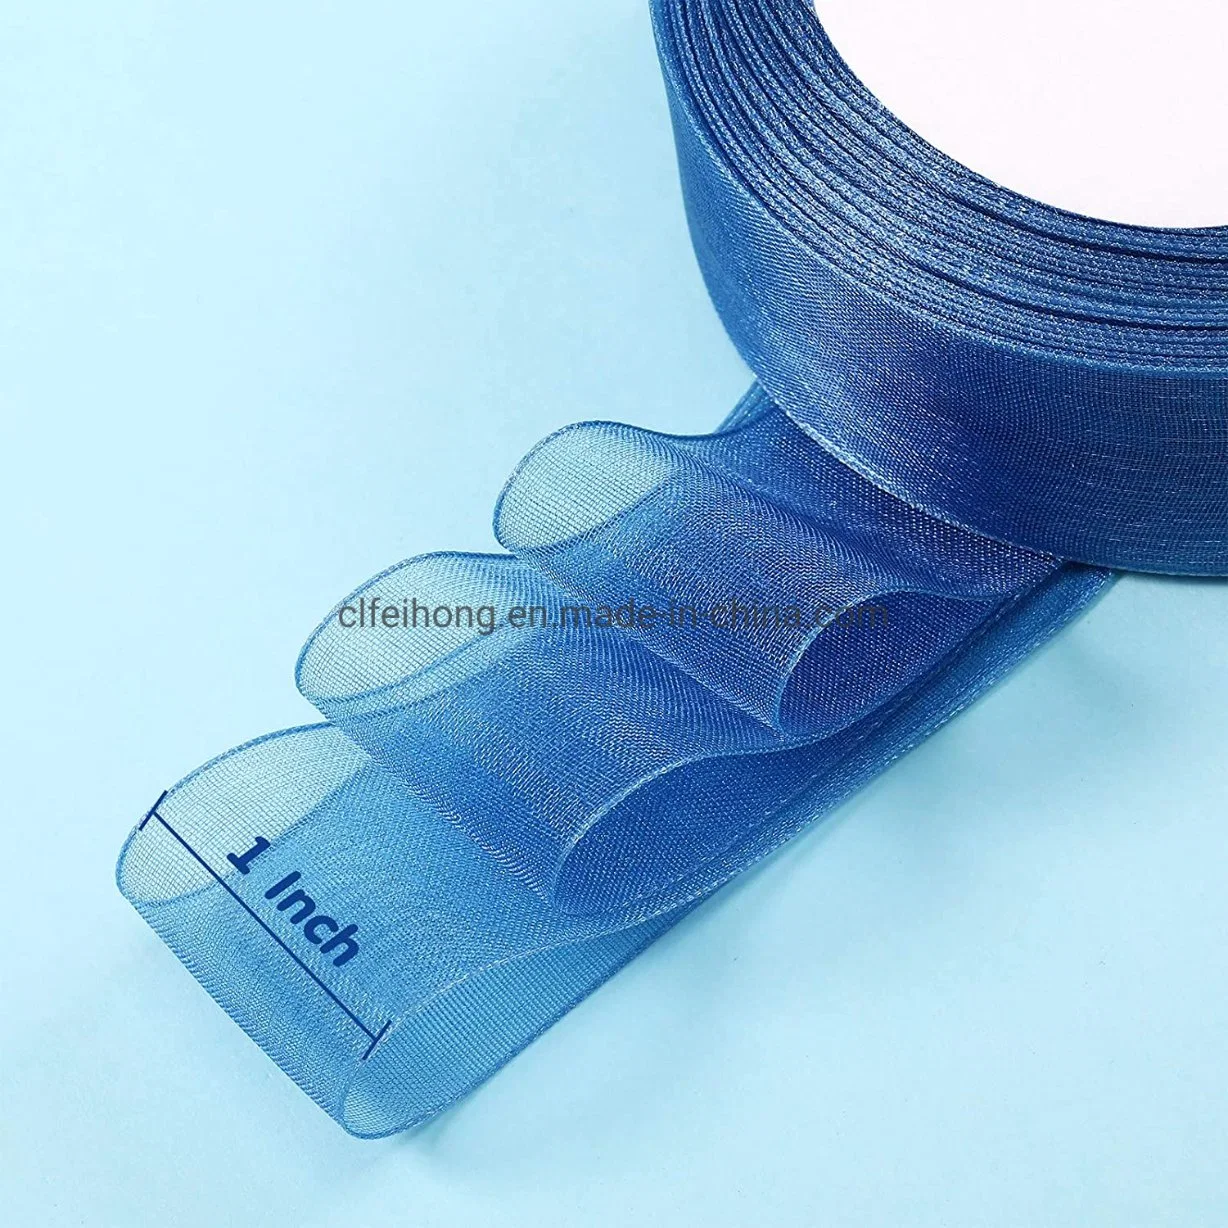 Blue Solid Color Fancy Organza Polyester Ribbons Light Texture Durable for Box Wrapping Decoration Wedding Occasion Birthday Gift Packaging